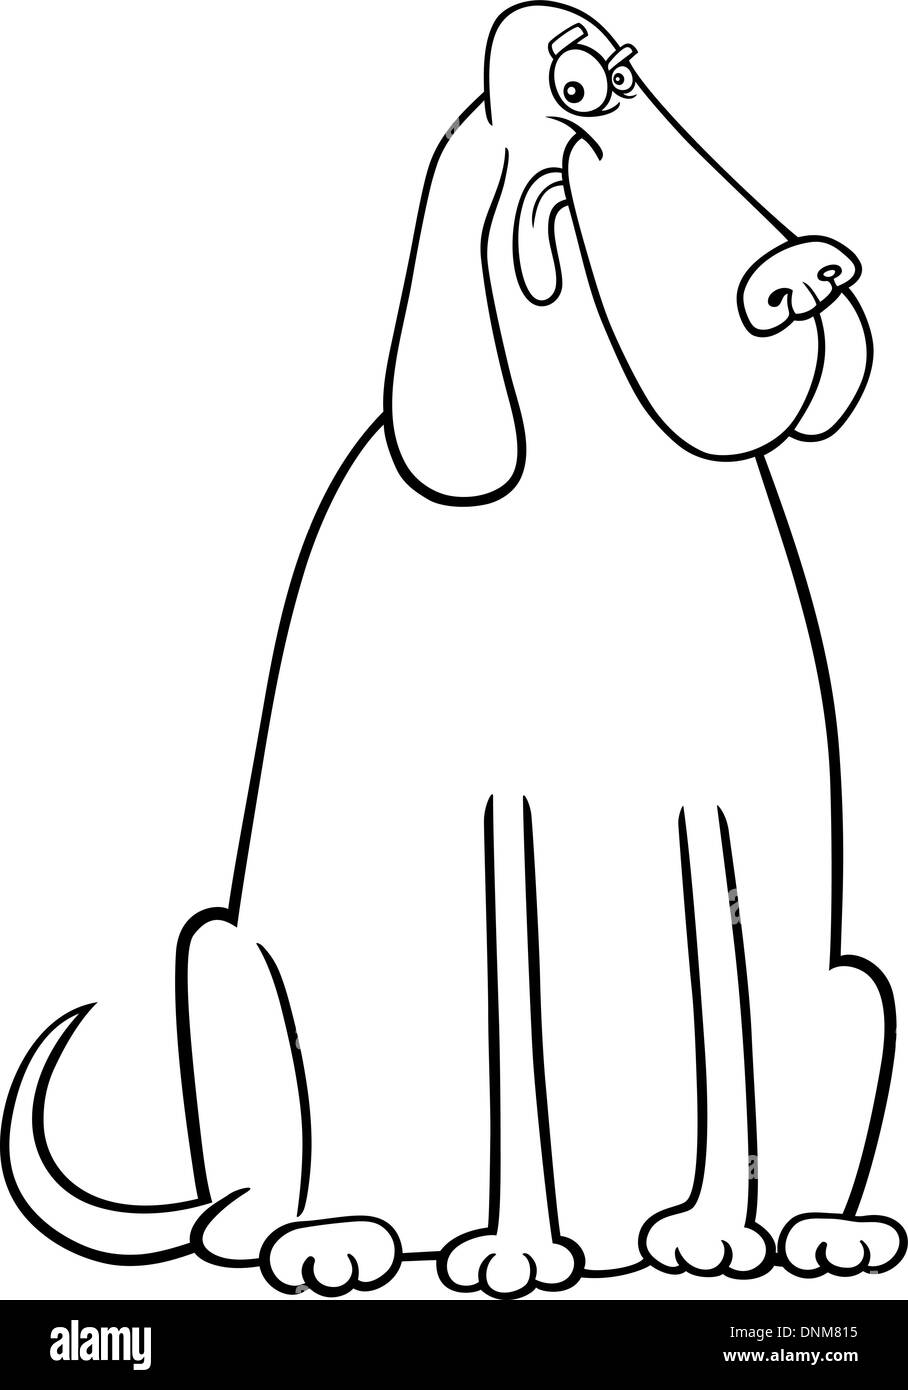 Cartoon Illustration of Funny Big Dog for Coloring Book or Coloring Page  Stock Vector Image & Art - Alamy